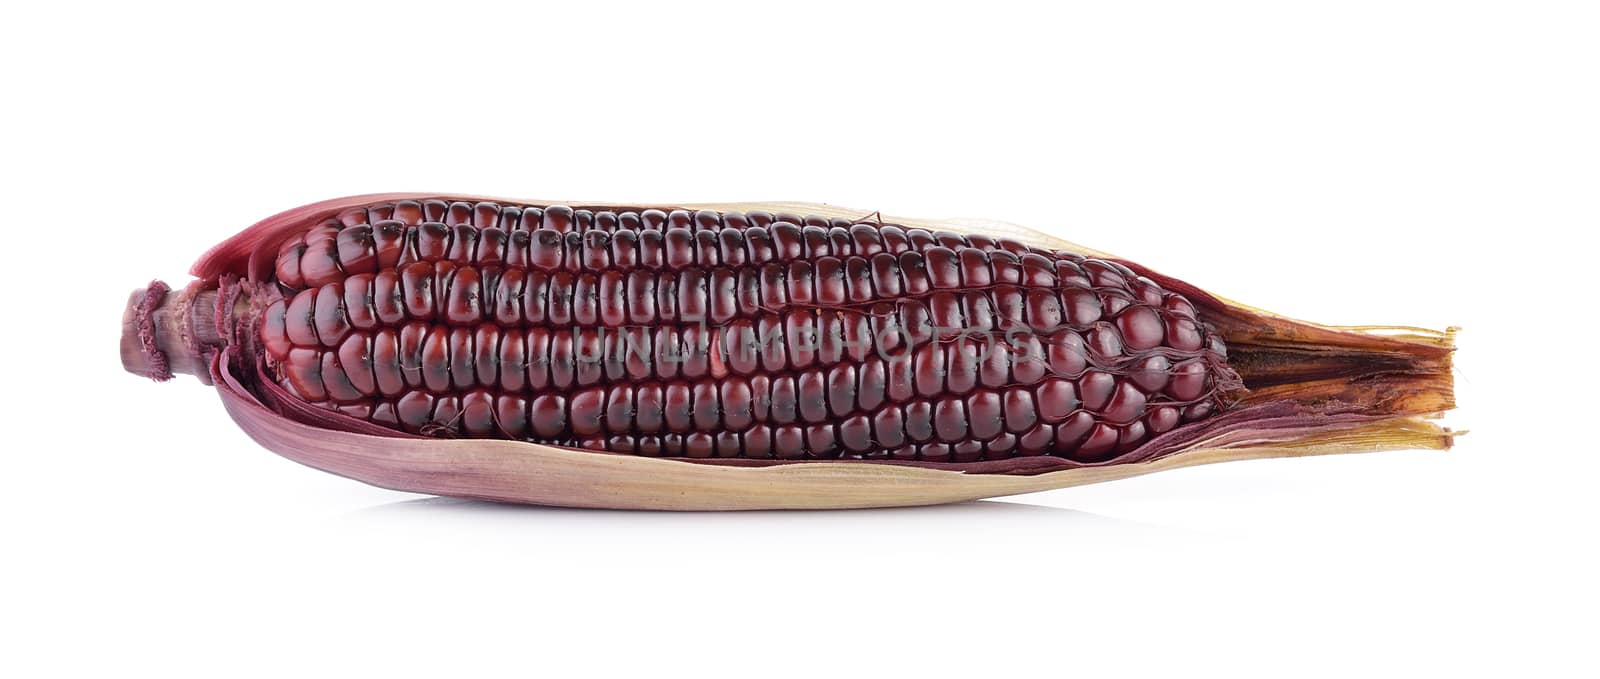 purple corn on white background by sommai